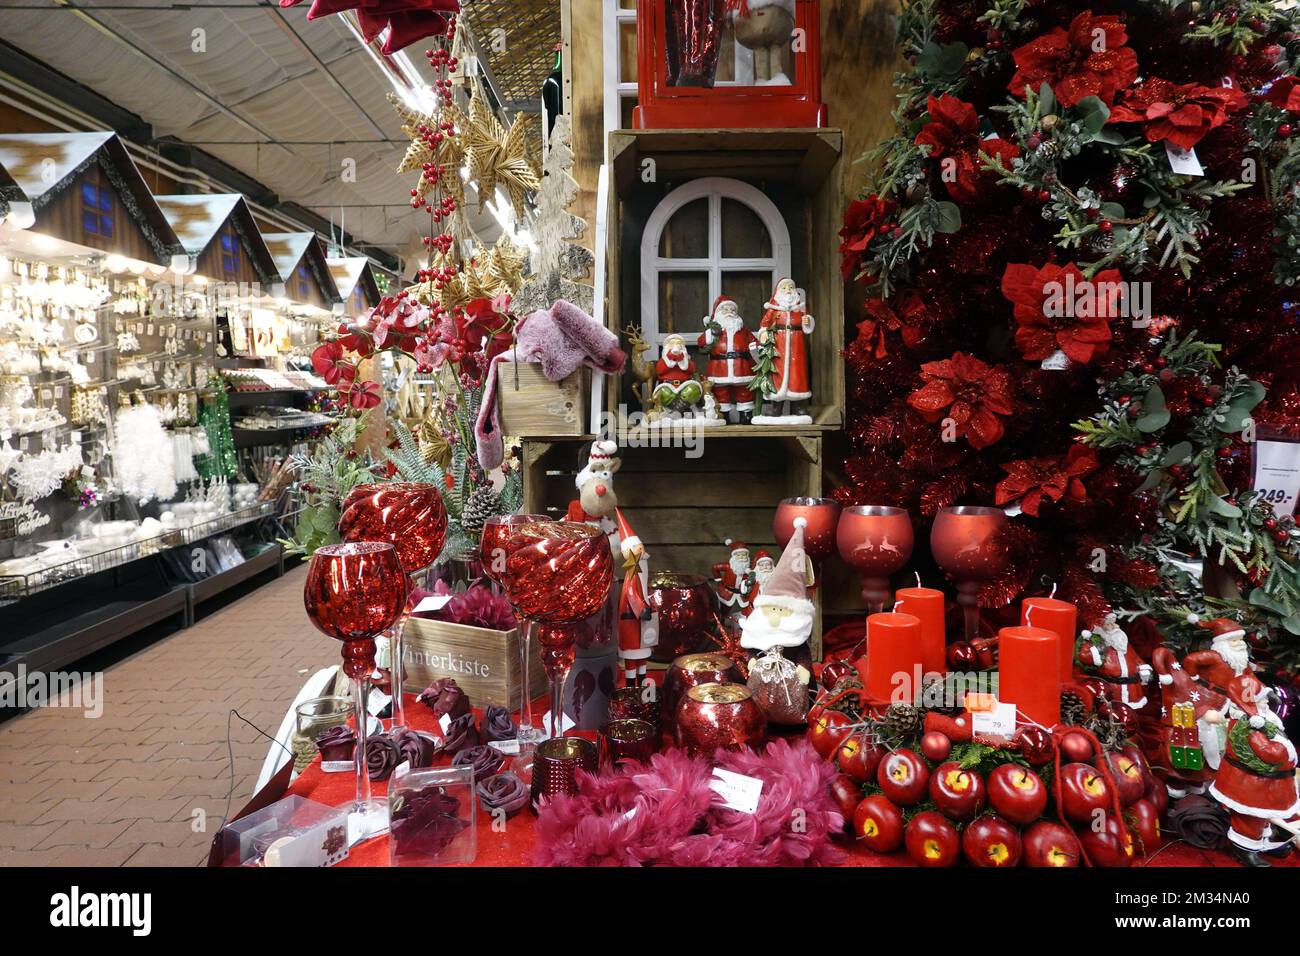 Alamy stock - Page hi-res images Deko 2 and photography weihnachtsmann -